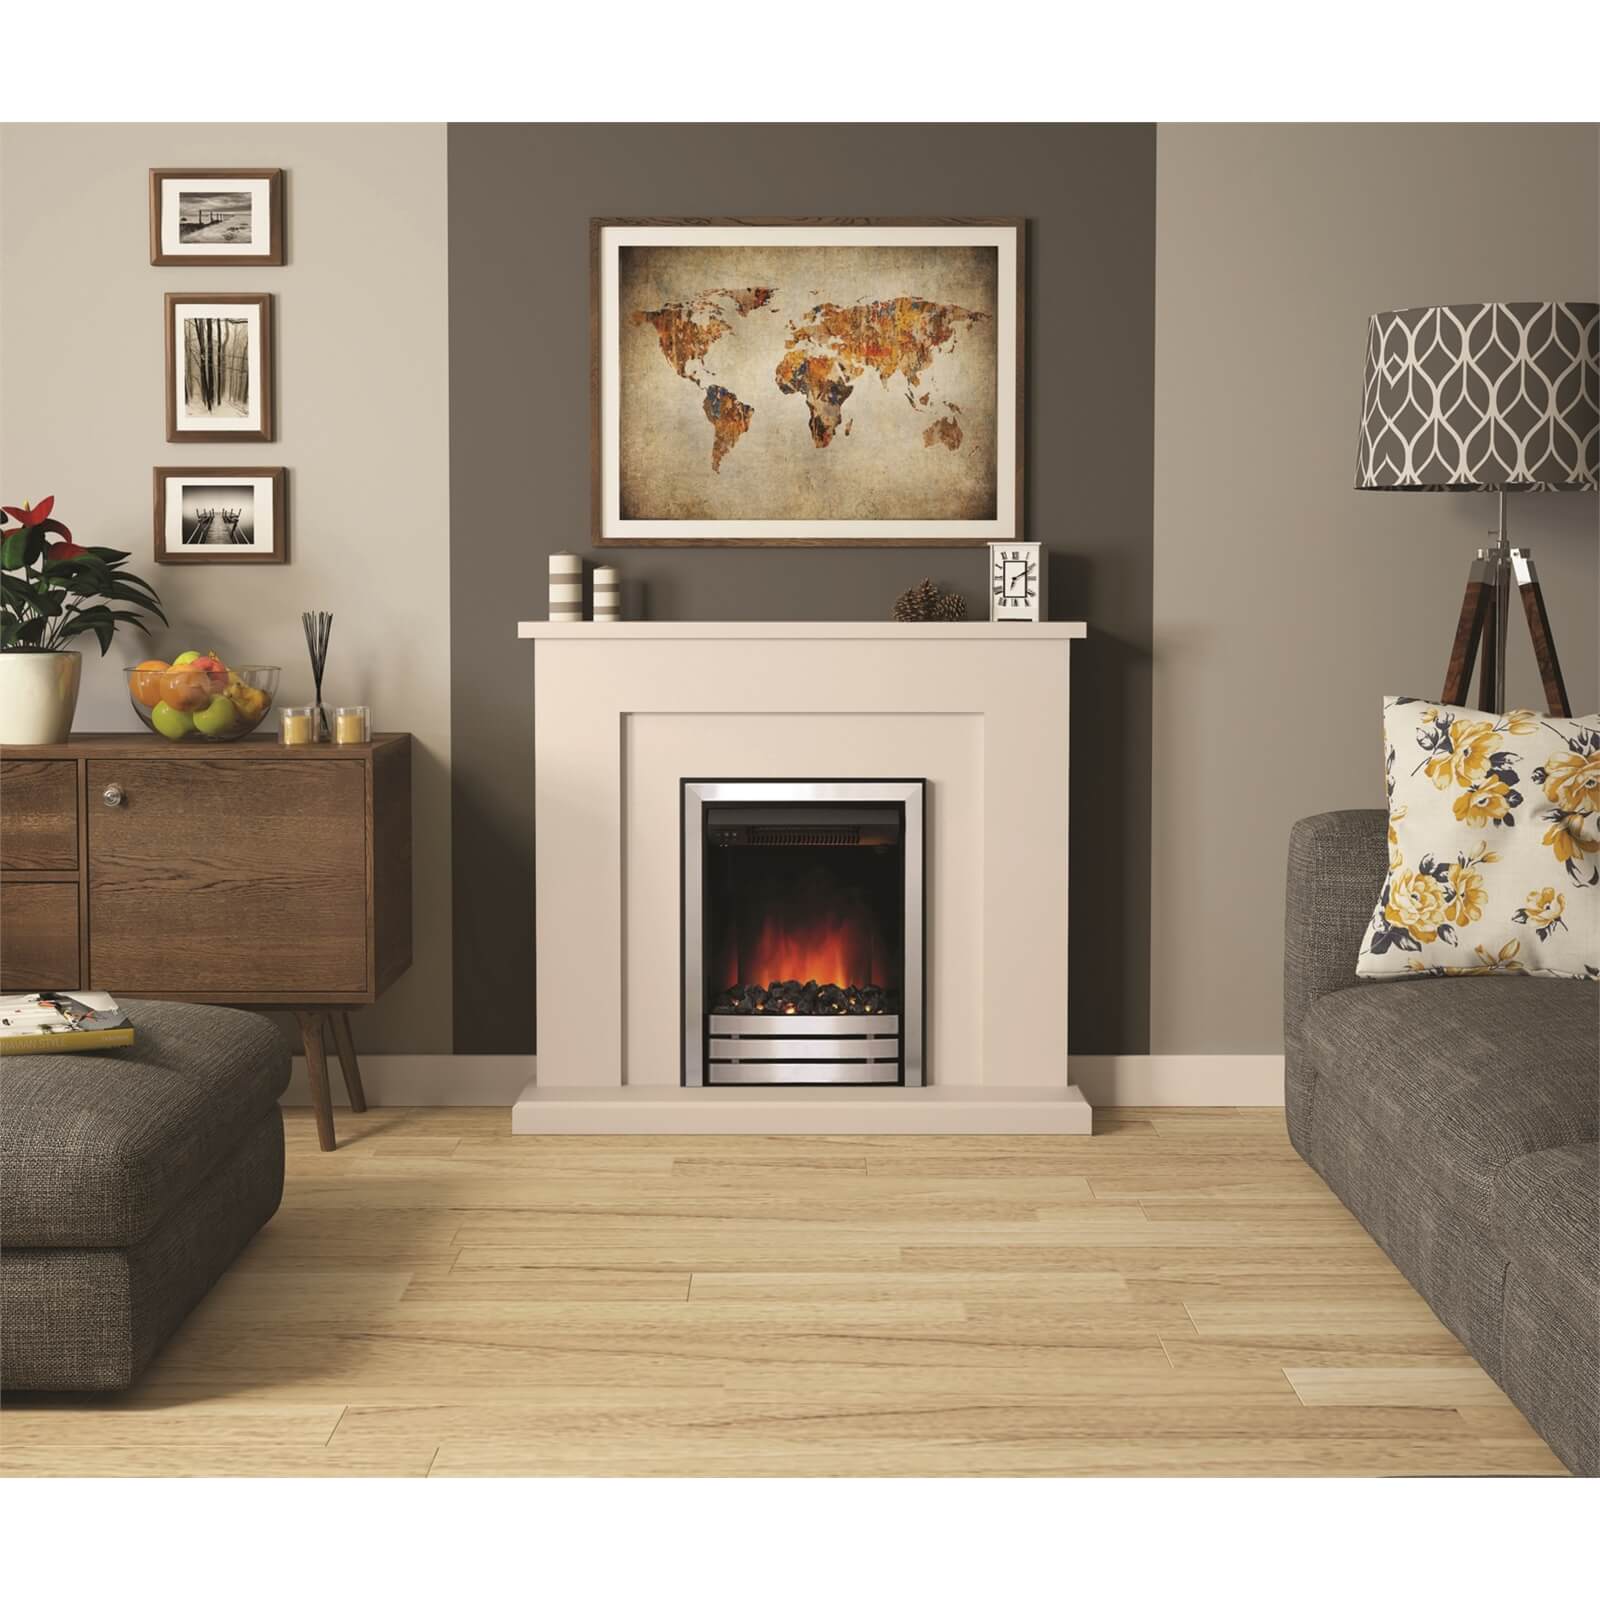 Be Modern Marden Electric Fire Suite with Flat to Wall Fitting - Cashmere & Brushed Chrome